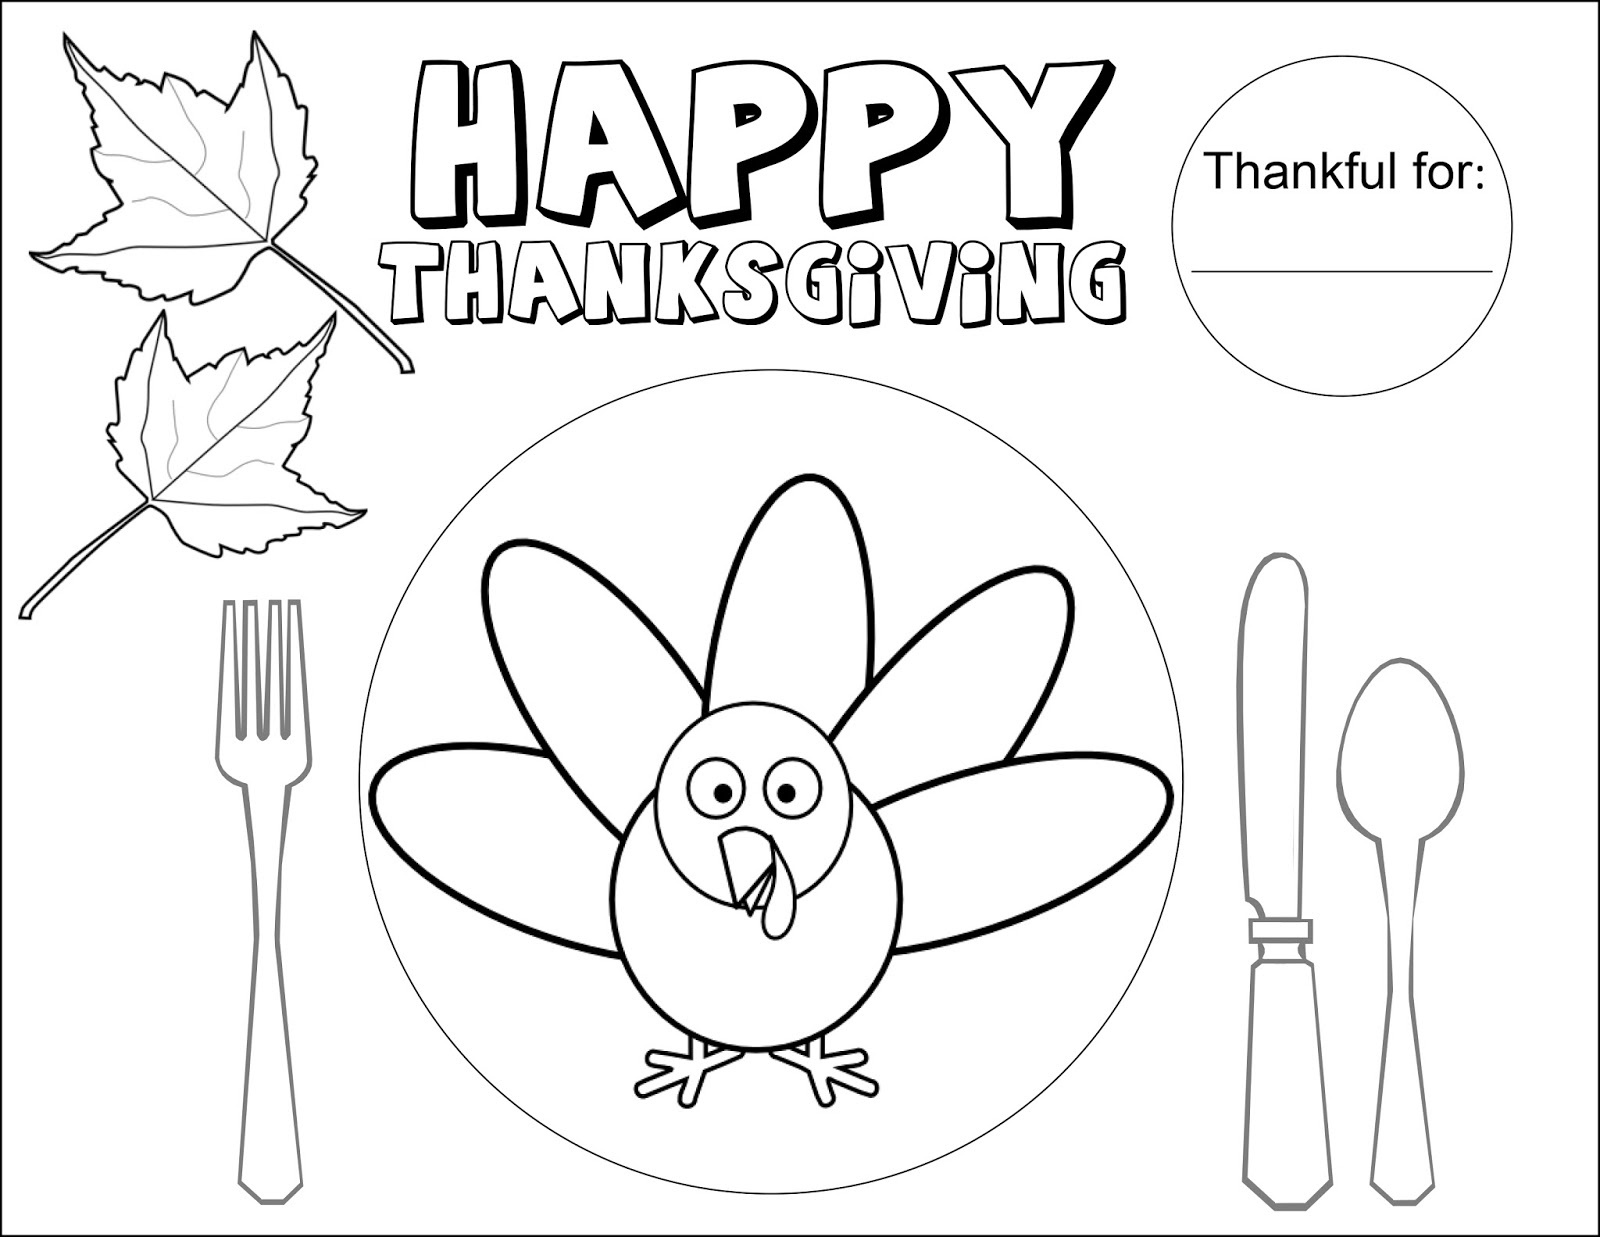 Coloring Placemats For Thanksgiving – Happy Easter &amp;amp; Thanksgiving 2018 - Free Printable Thanksgiving Coloring Placemats